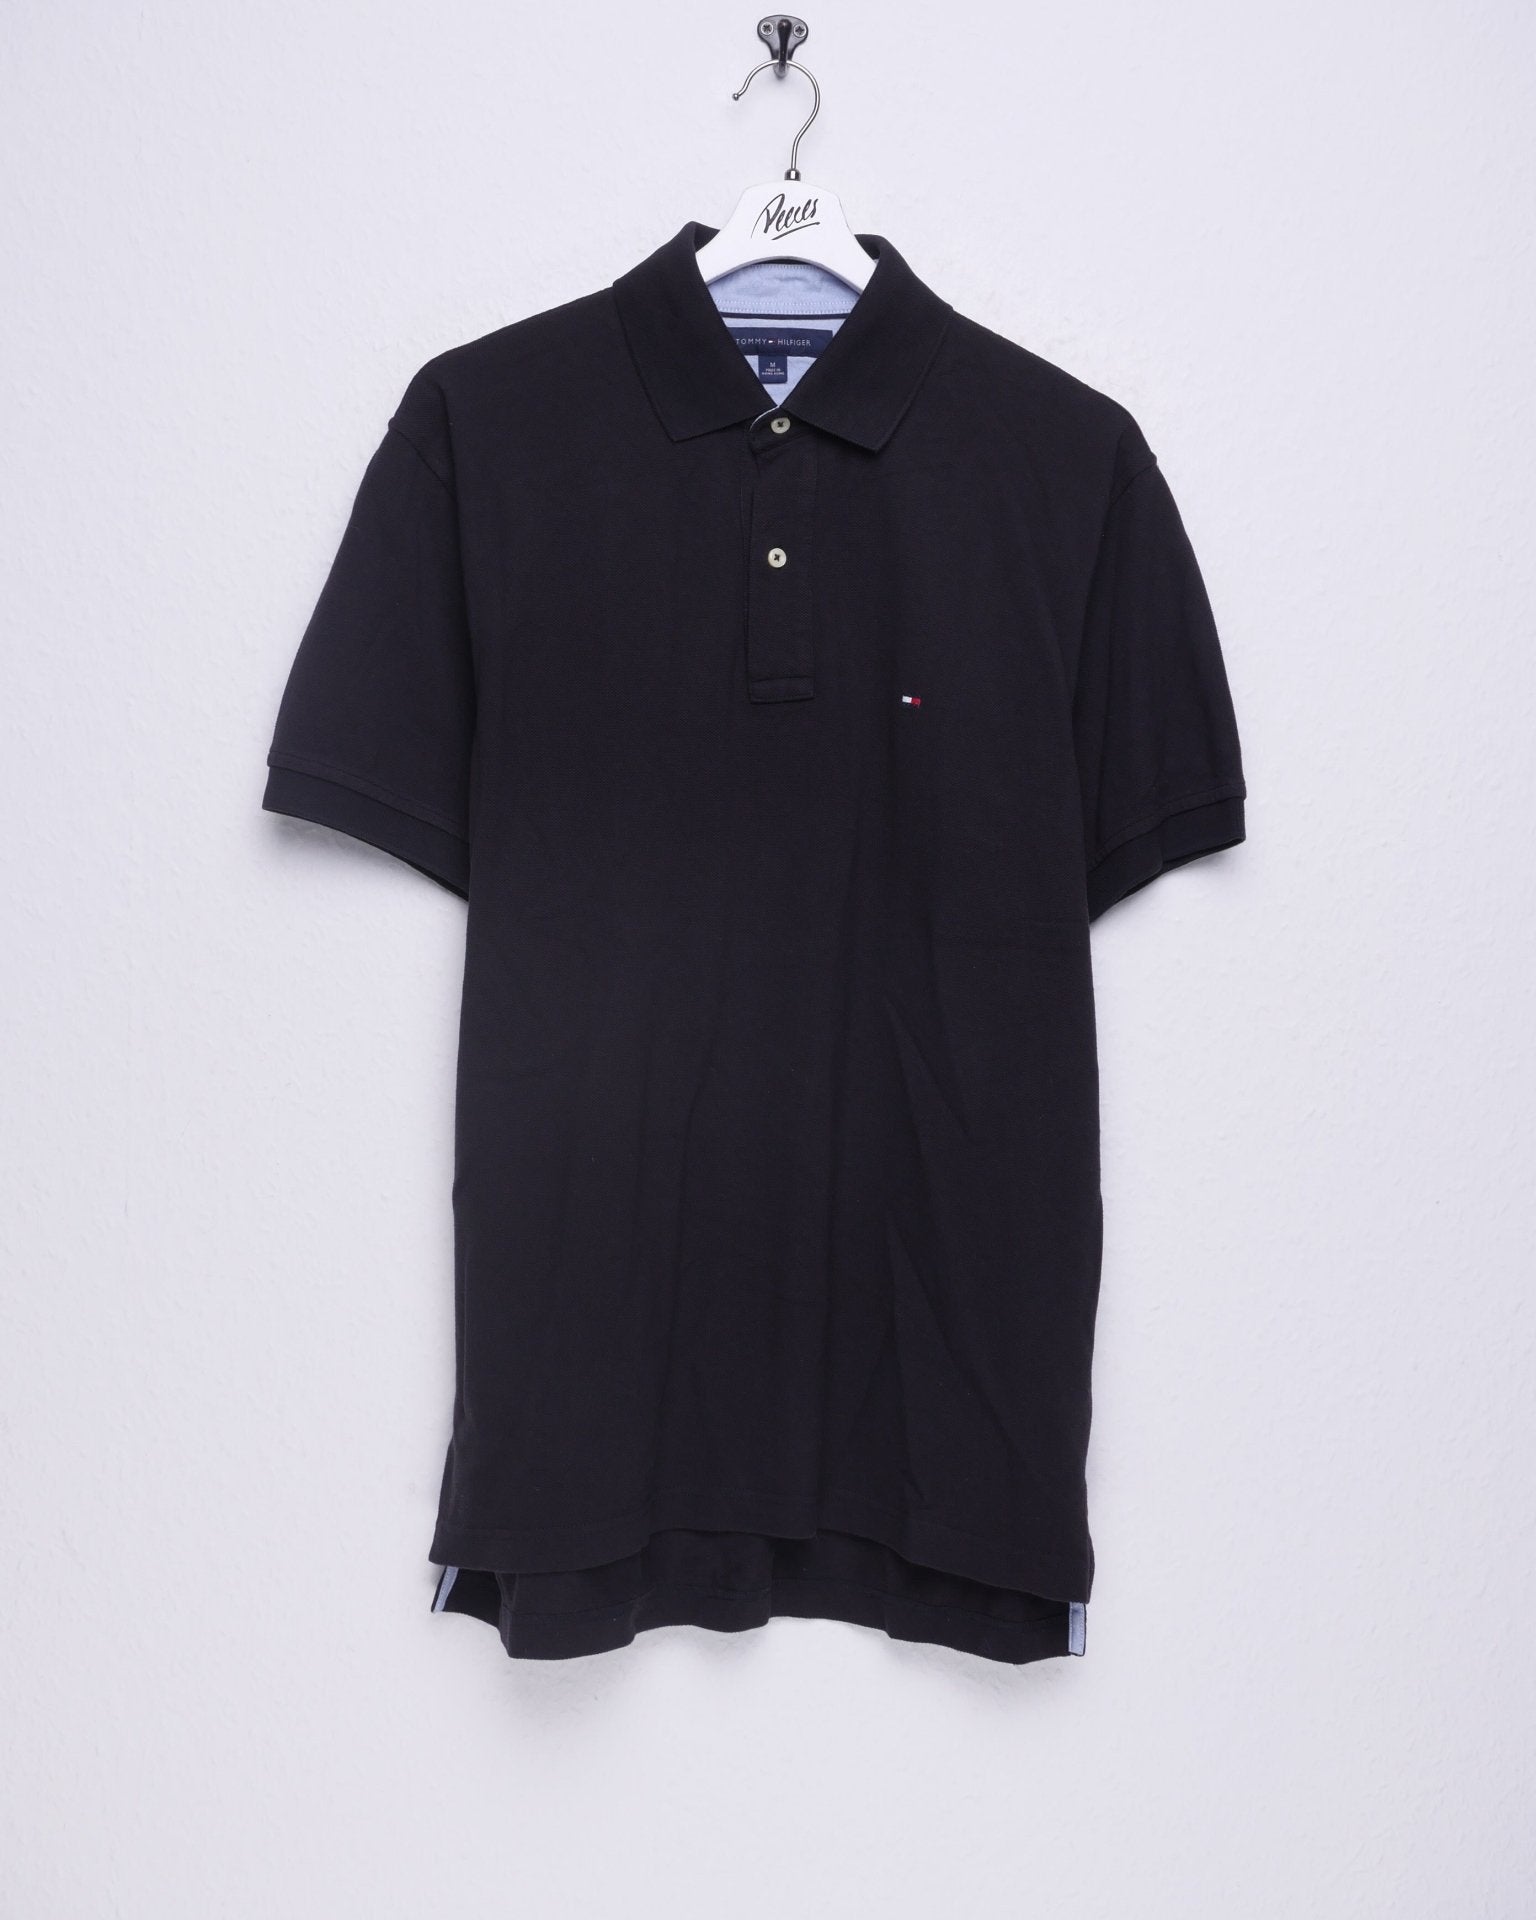 Tommy Hilfiger embroidered Logo black S/S Polo Shirt - Peeces